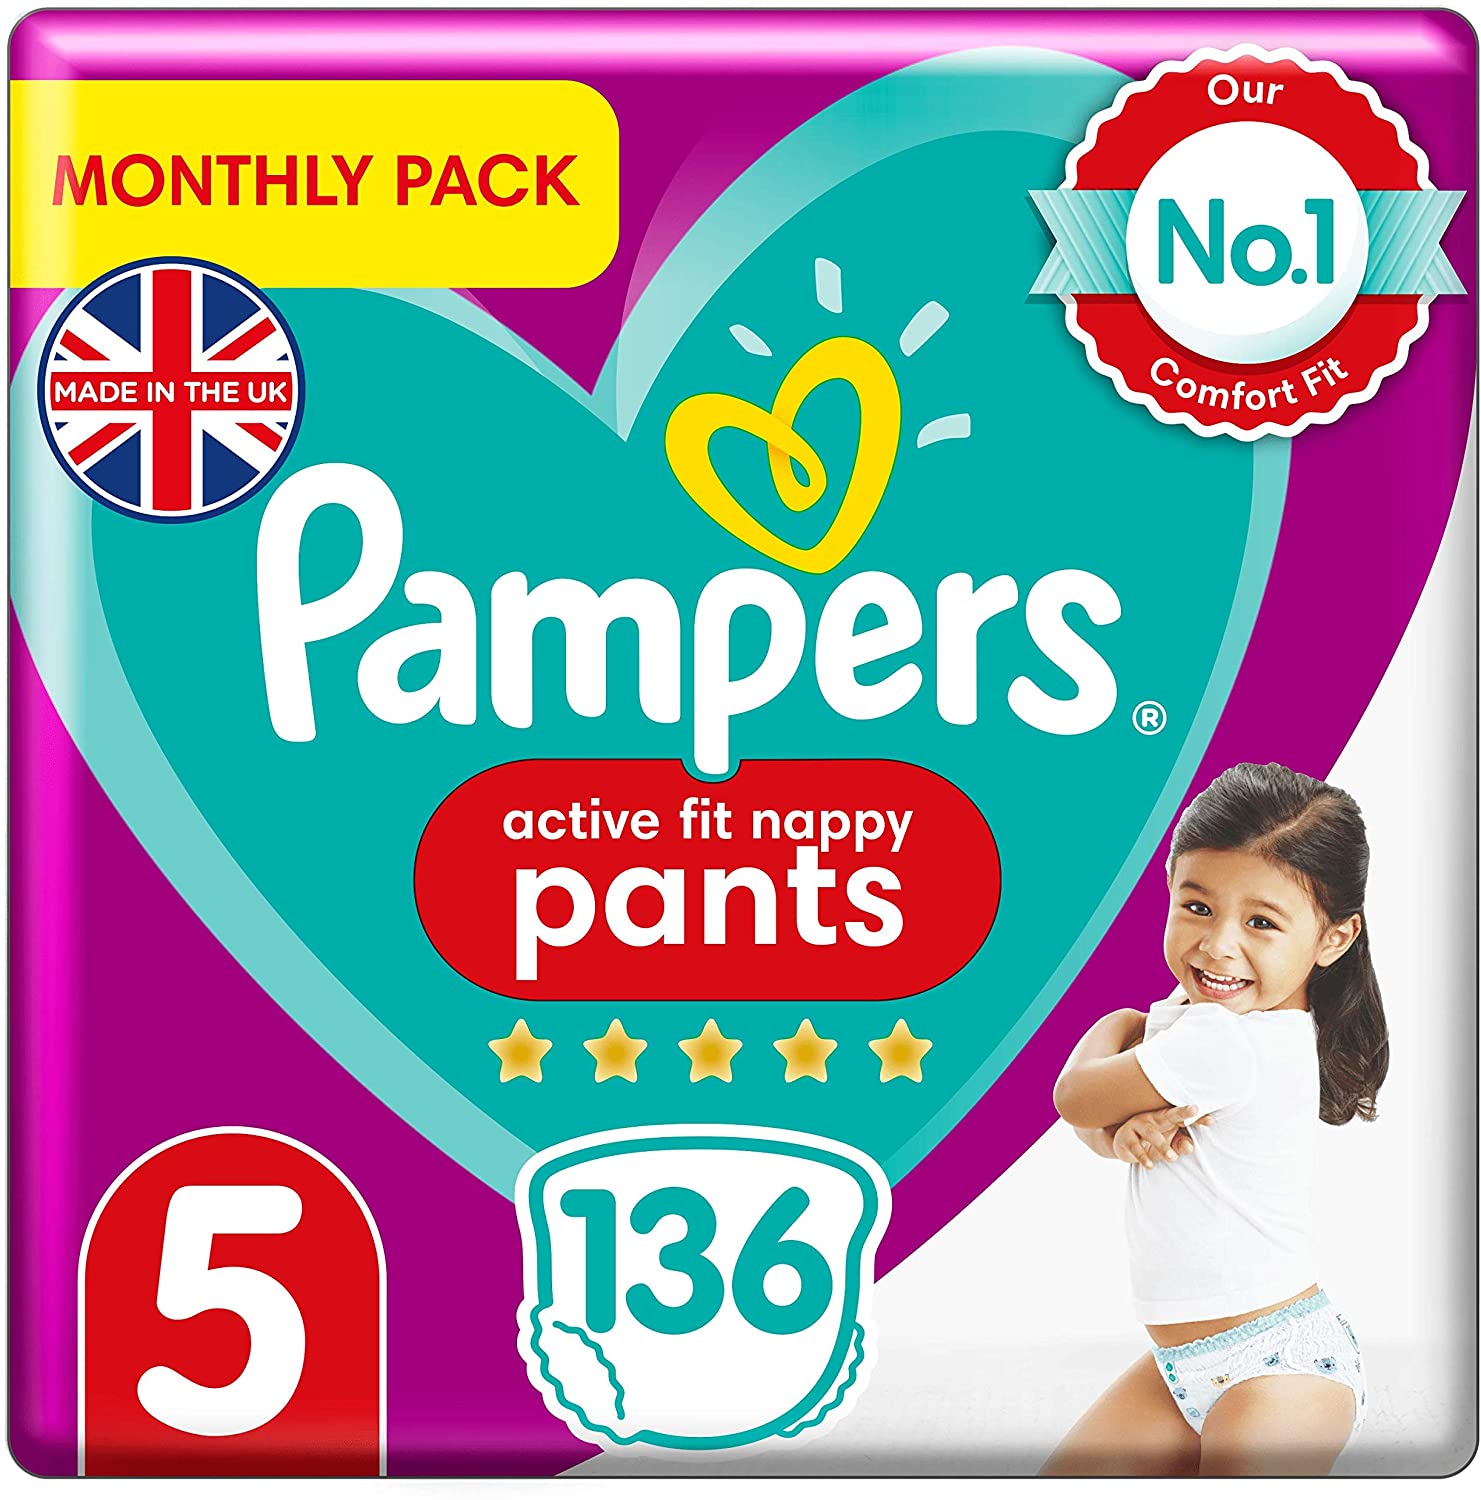 Pampers Size 5 Active Nappy Pants 136 count monthly pack - (12kg -